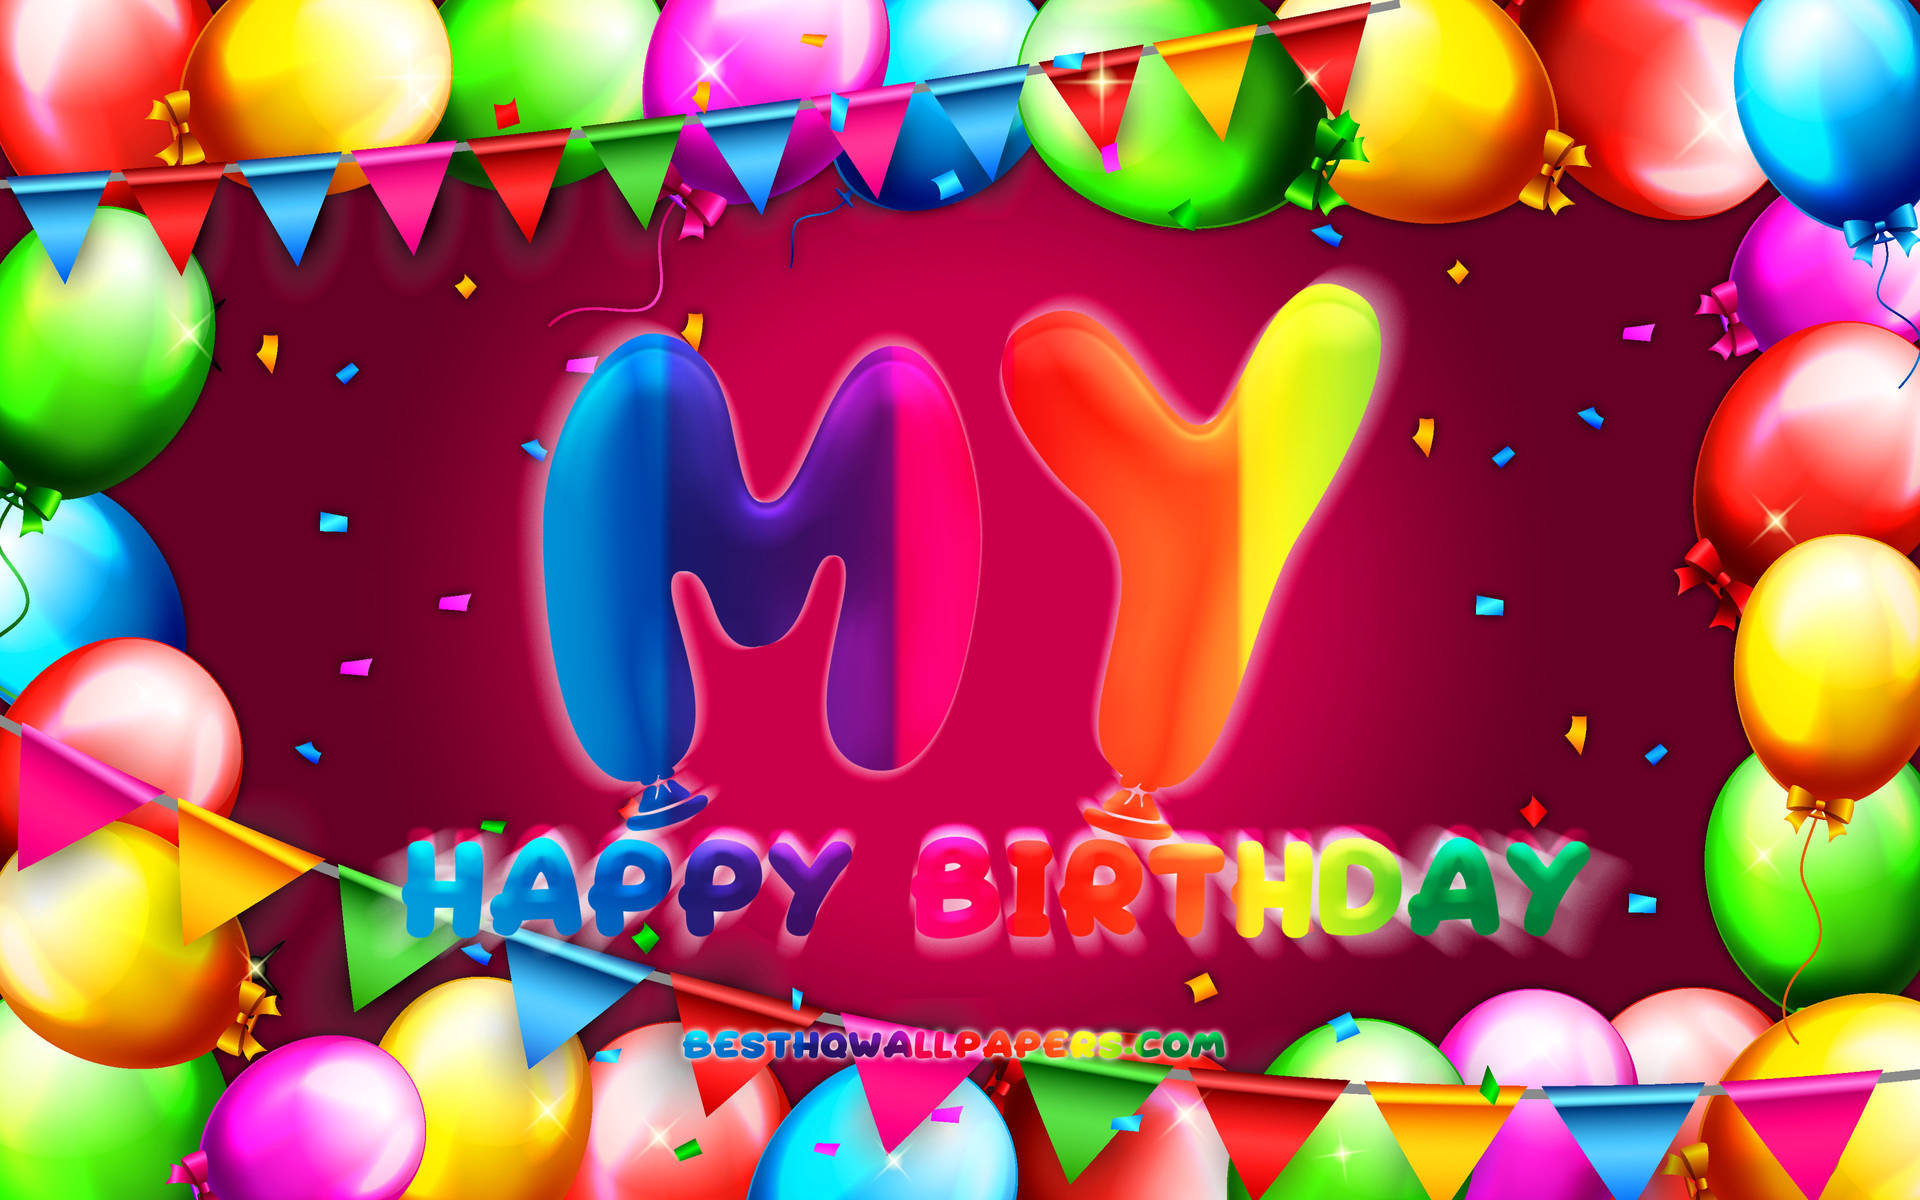 Colorful Balloons And Banners For My Birthday Background